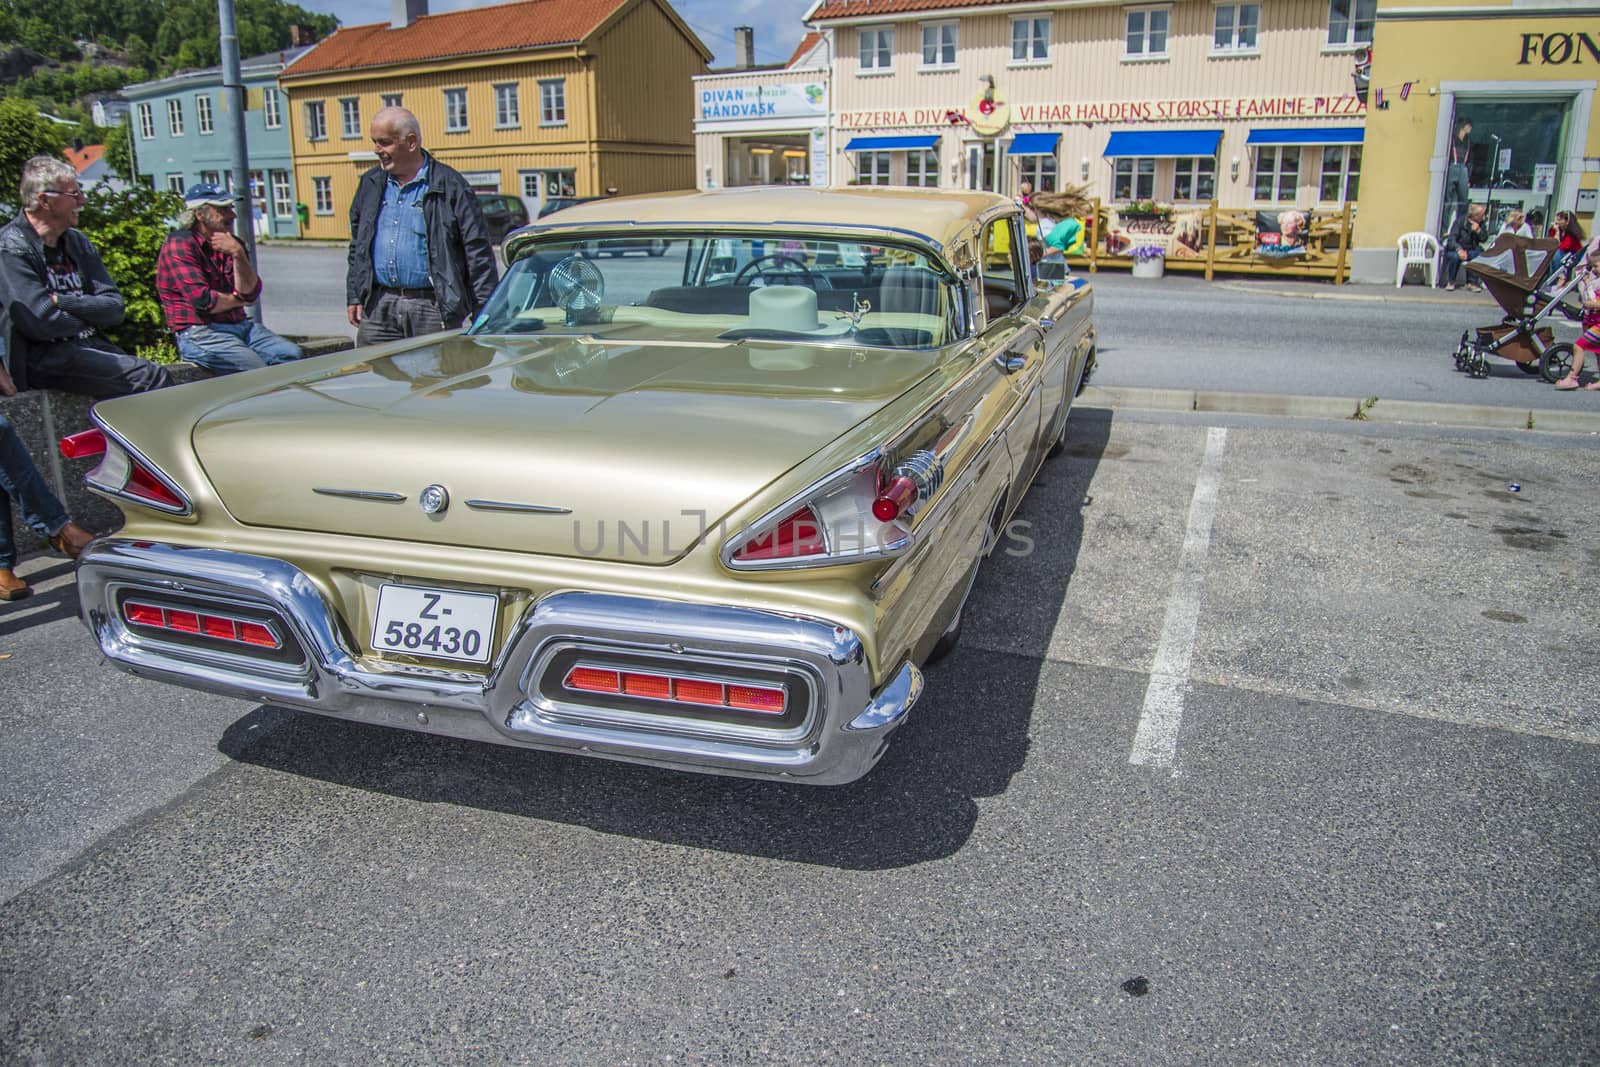 Beautifully restored classic American car. The photo is shot at the fish market in Halden, Norway.